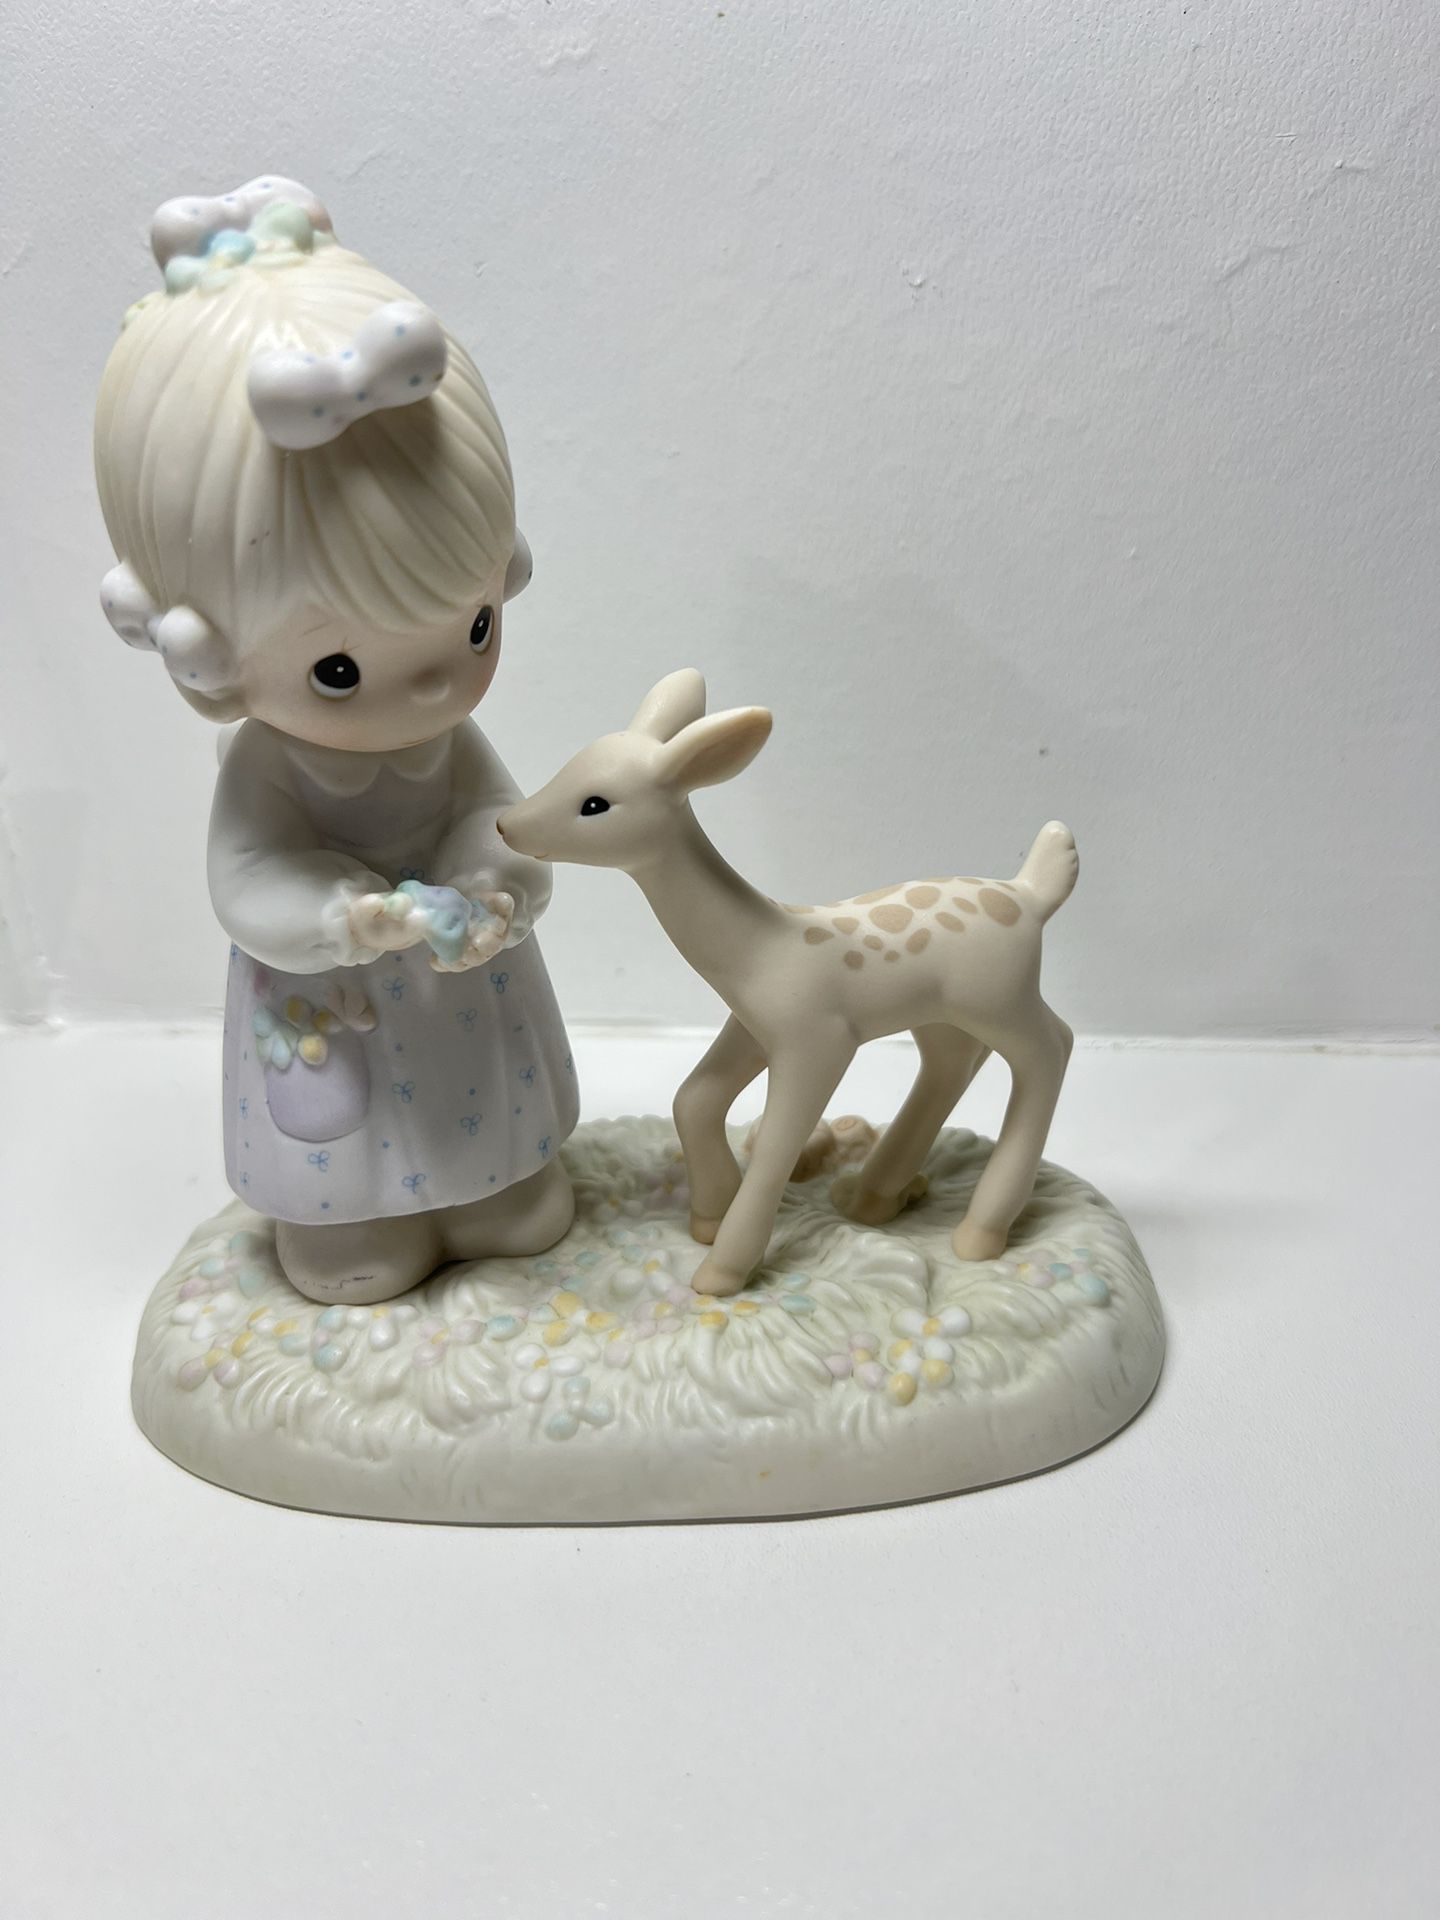 Precious Moments “To My Deer Friend”  Retired 1986